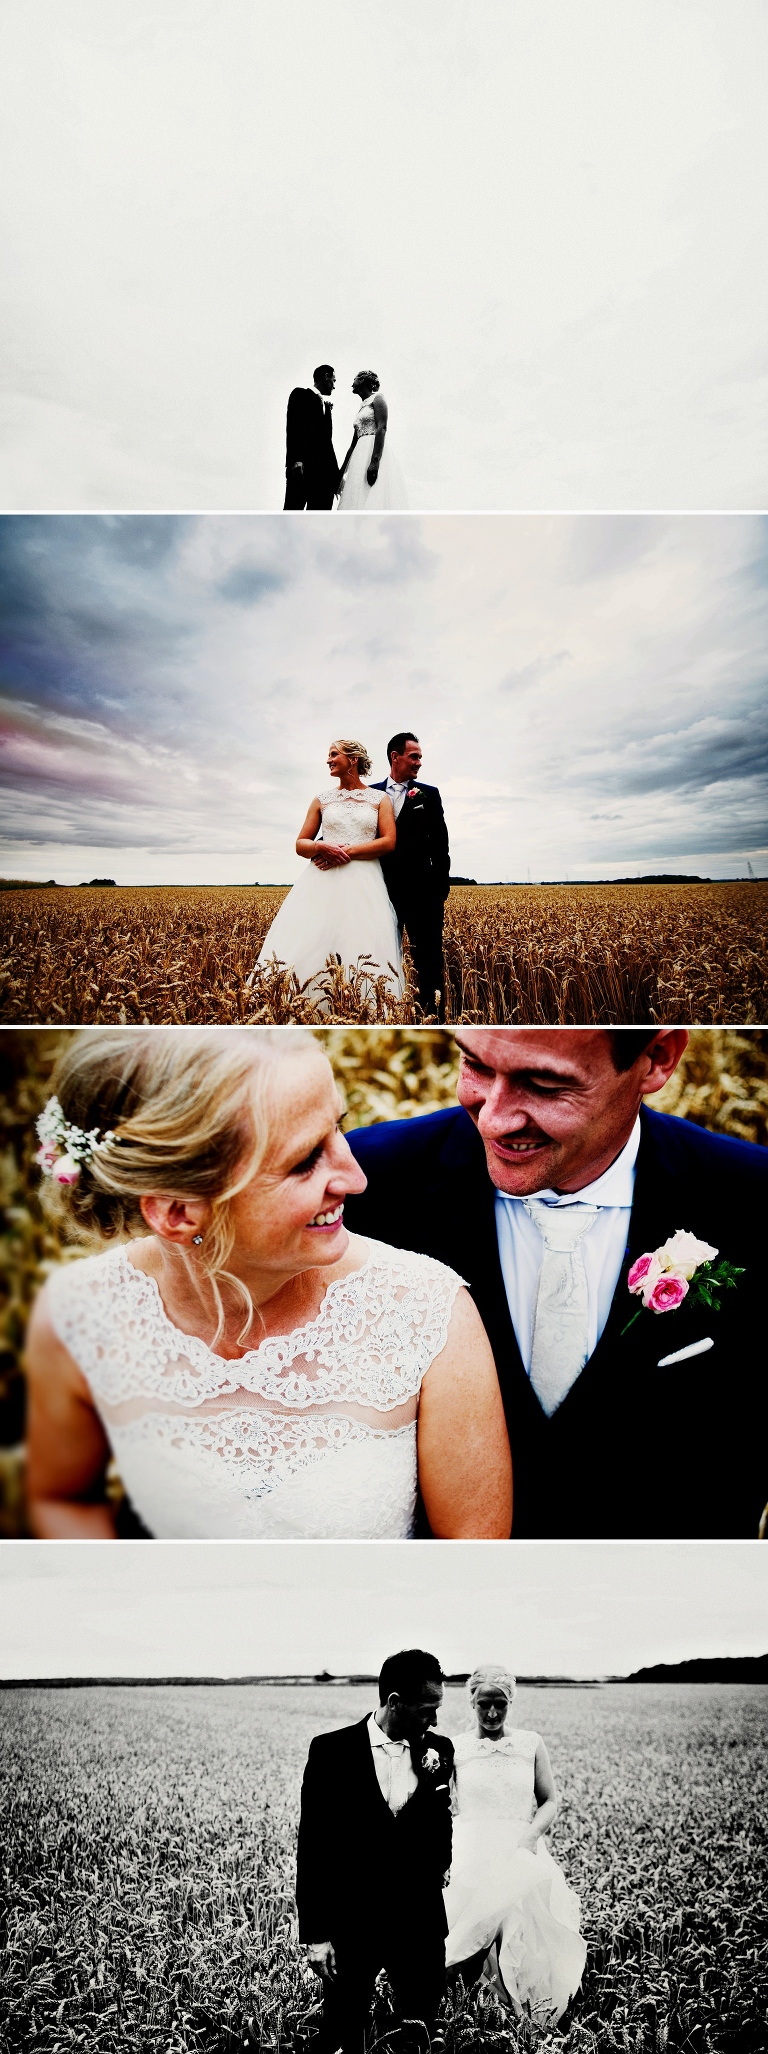 Barley fields at bassmead manor barn are great for bride and groom portraits